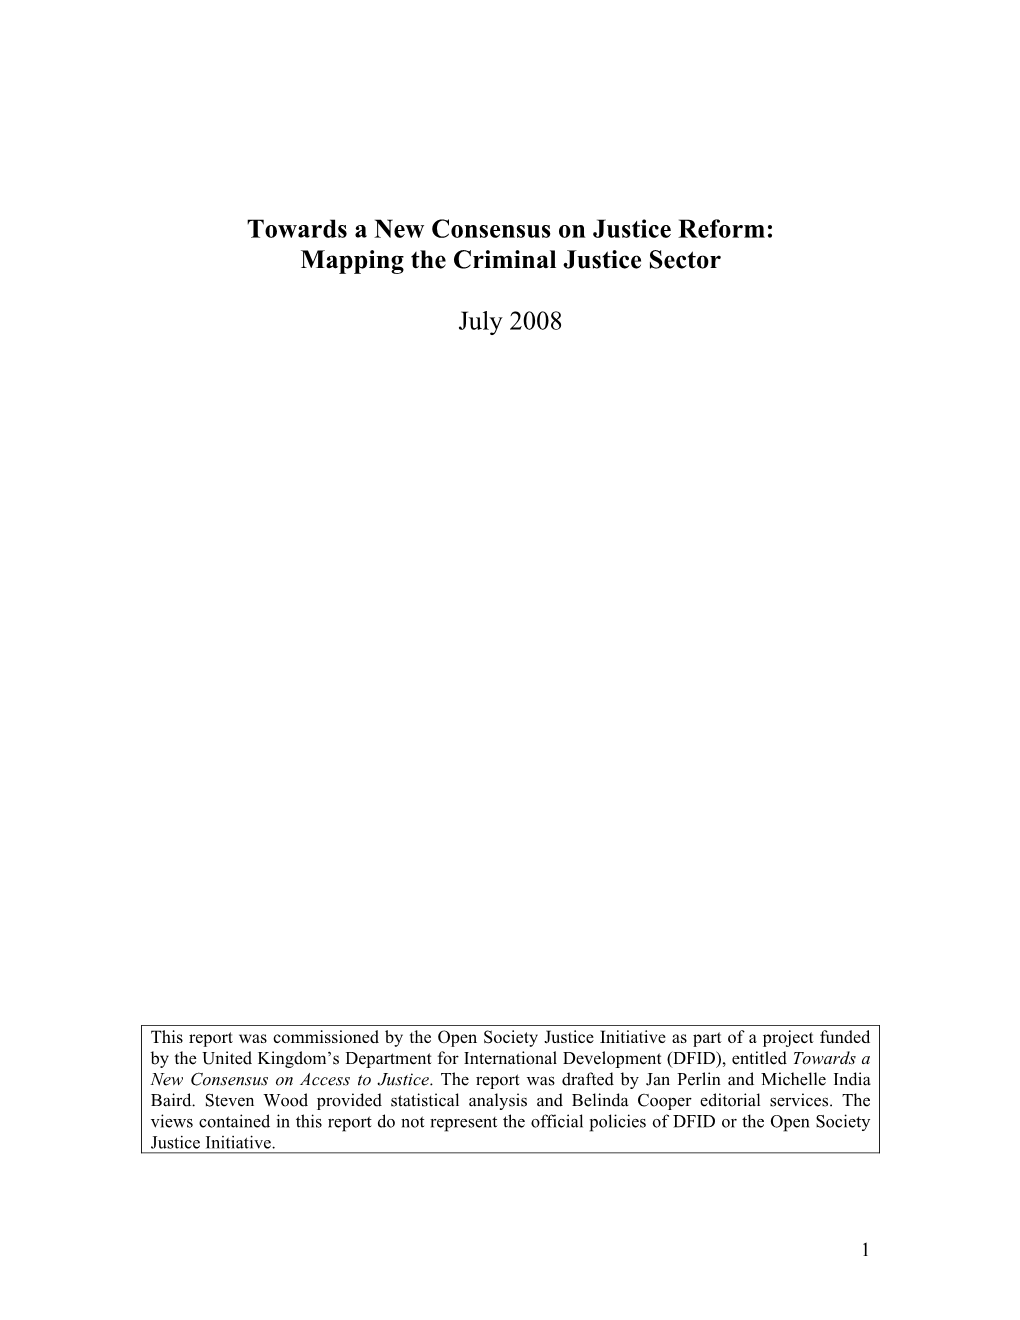 Towards a New Consensus on Justice Reform: Mapping the Criminal Justice Sector